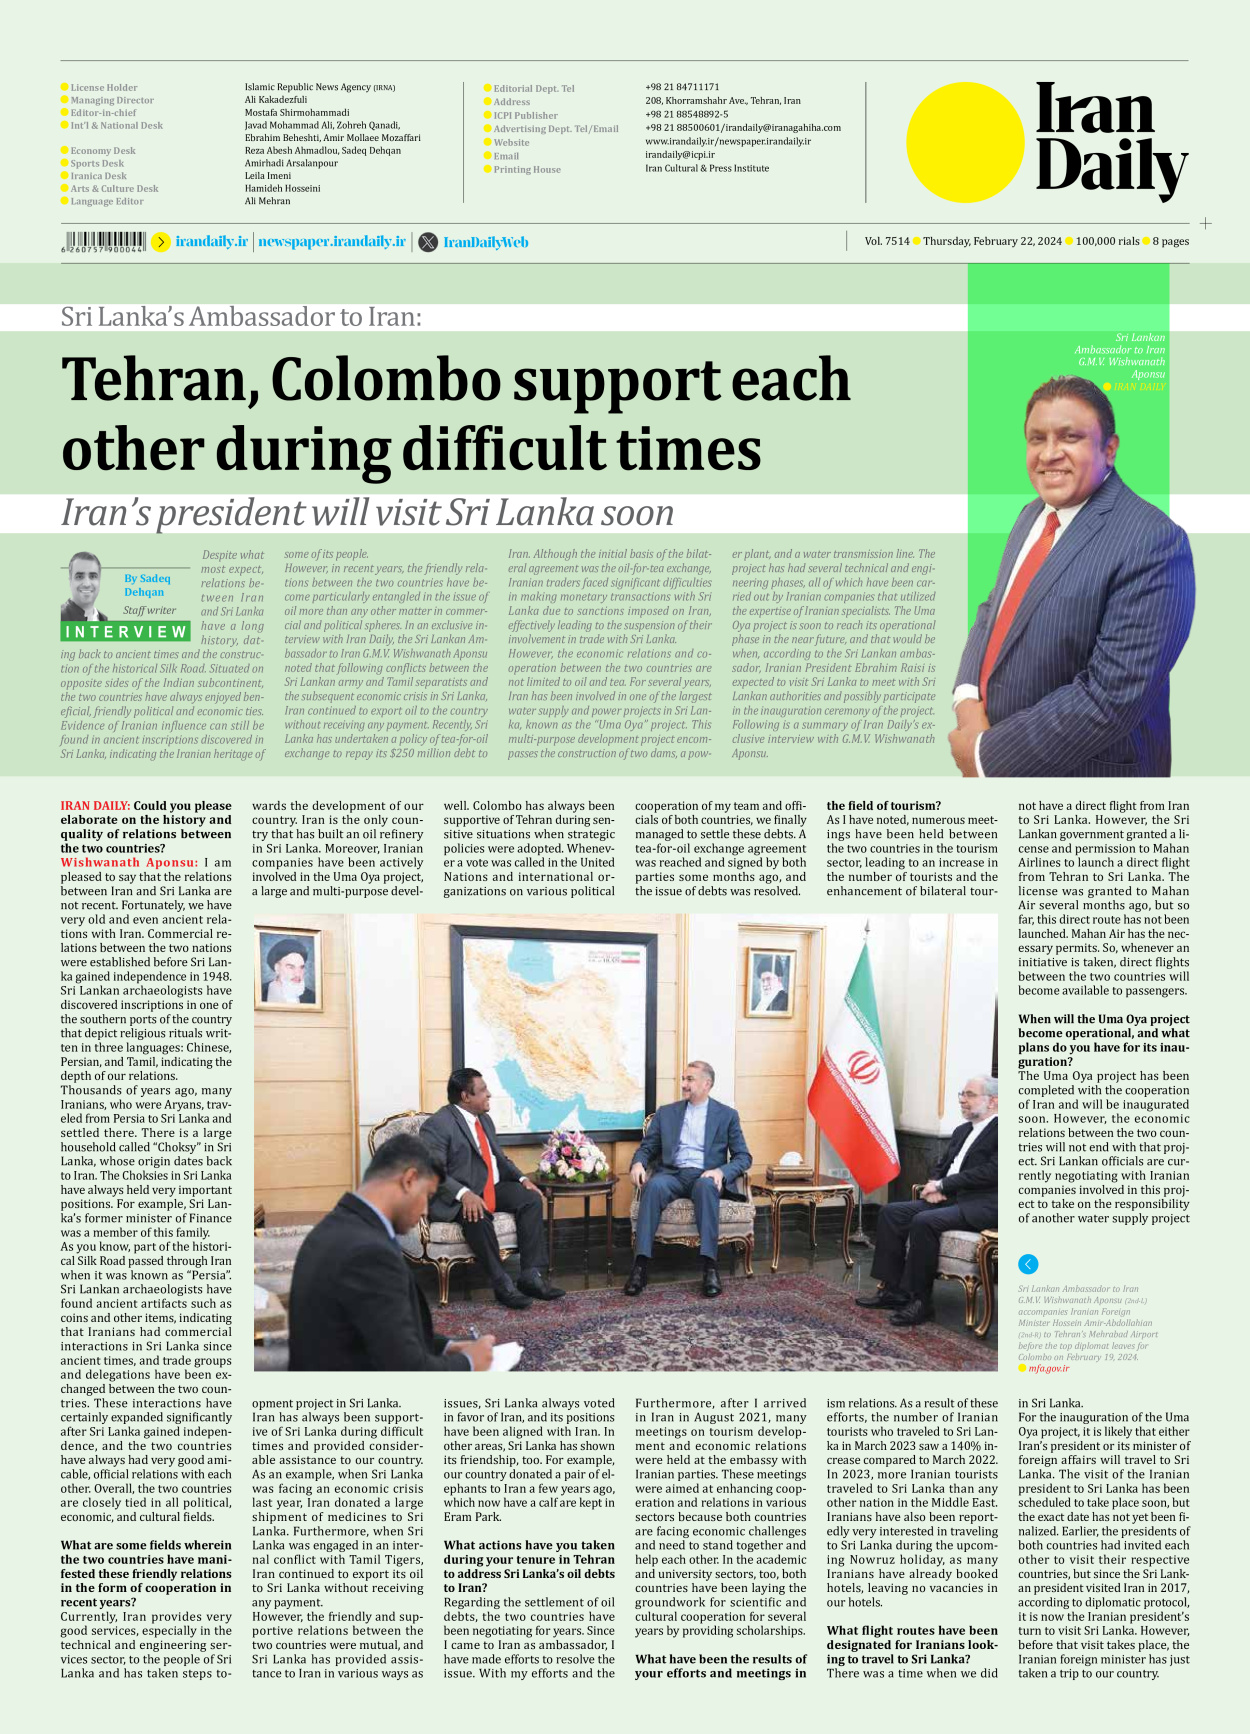 Iran Daily - Number Seven Thousand Five Hundred and Fourteen - 22 February 2024 - Page 8